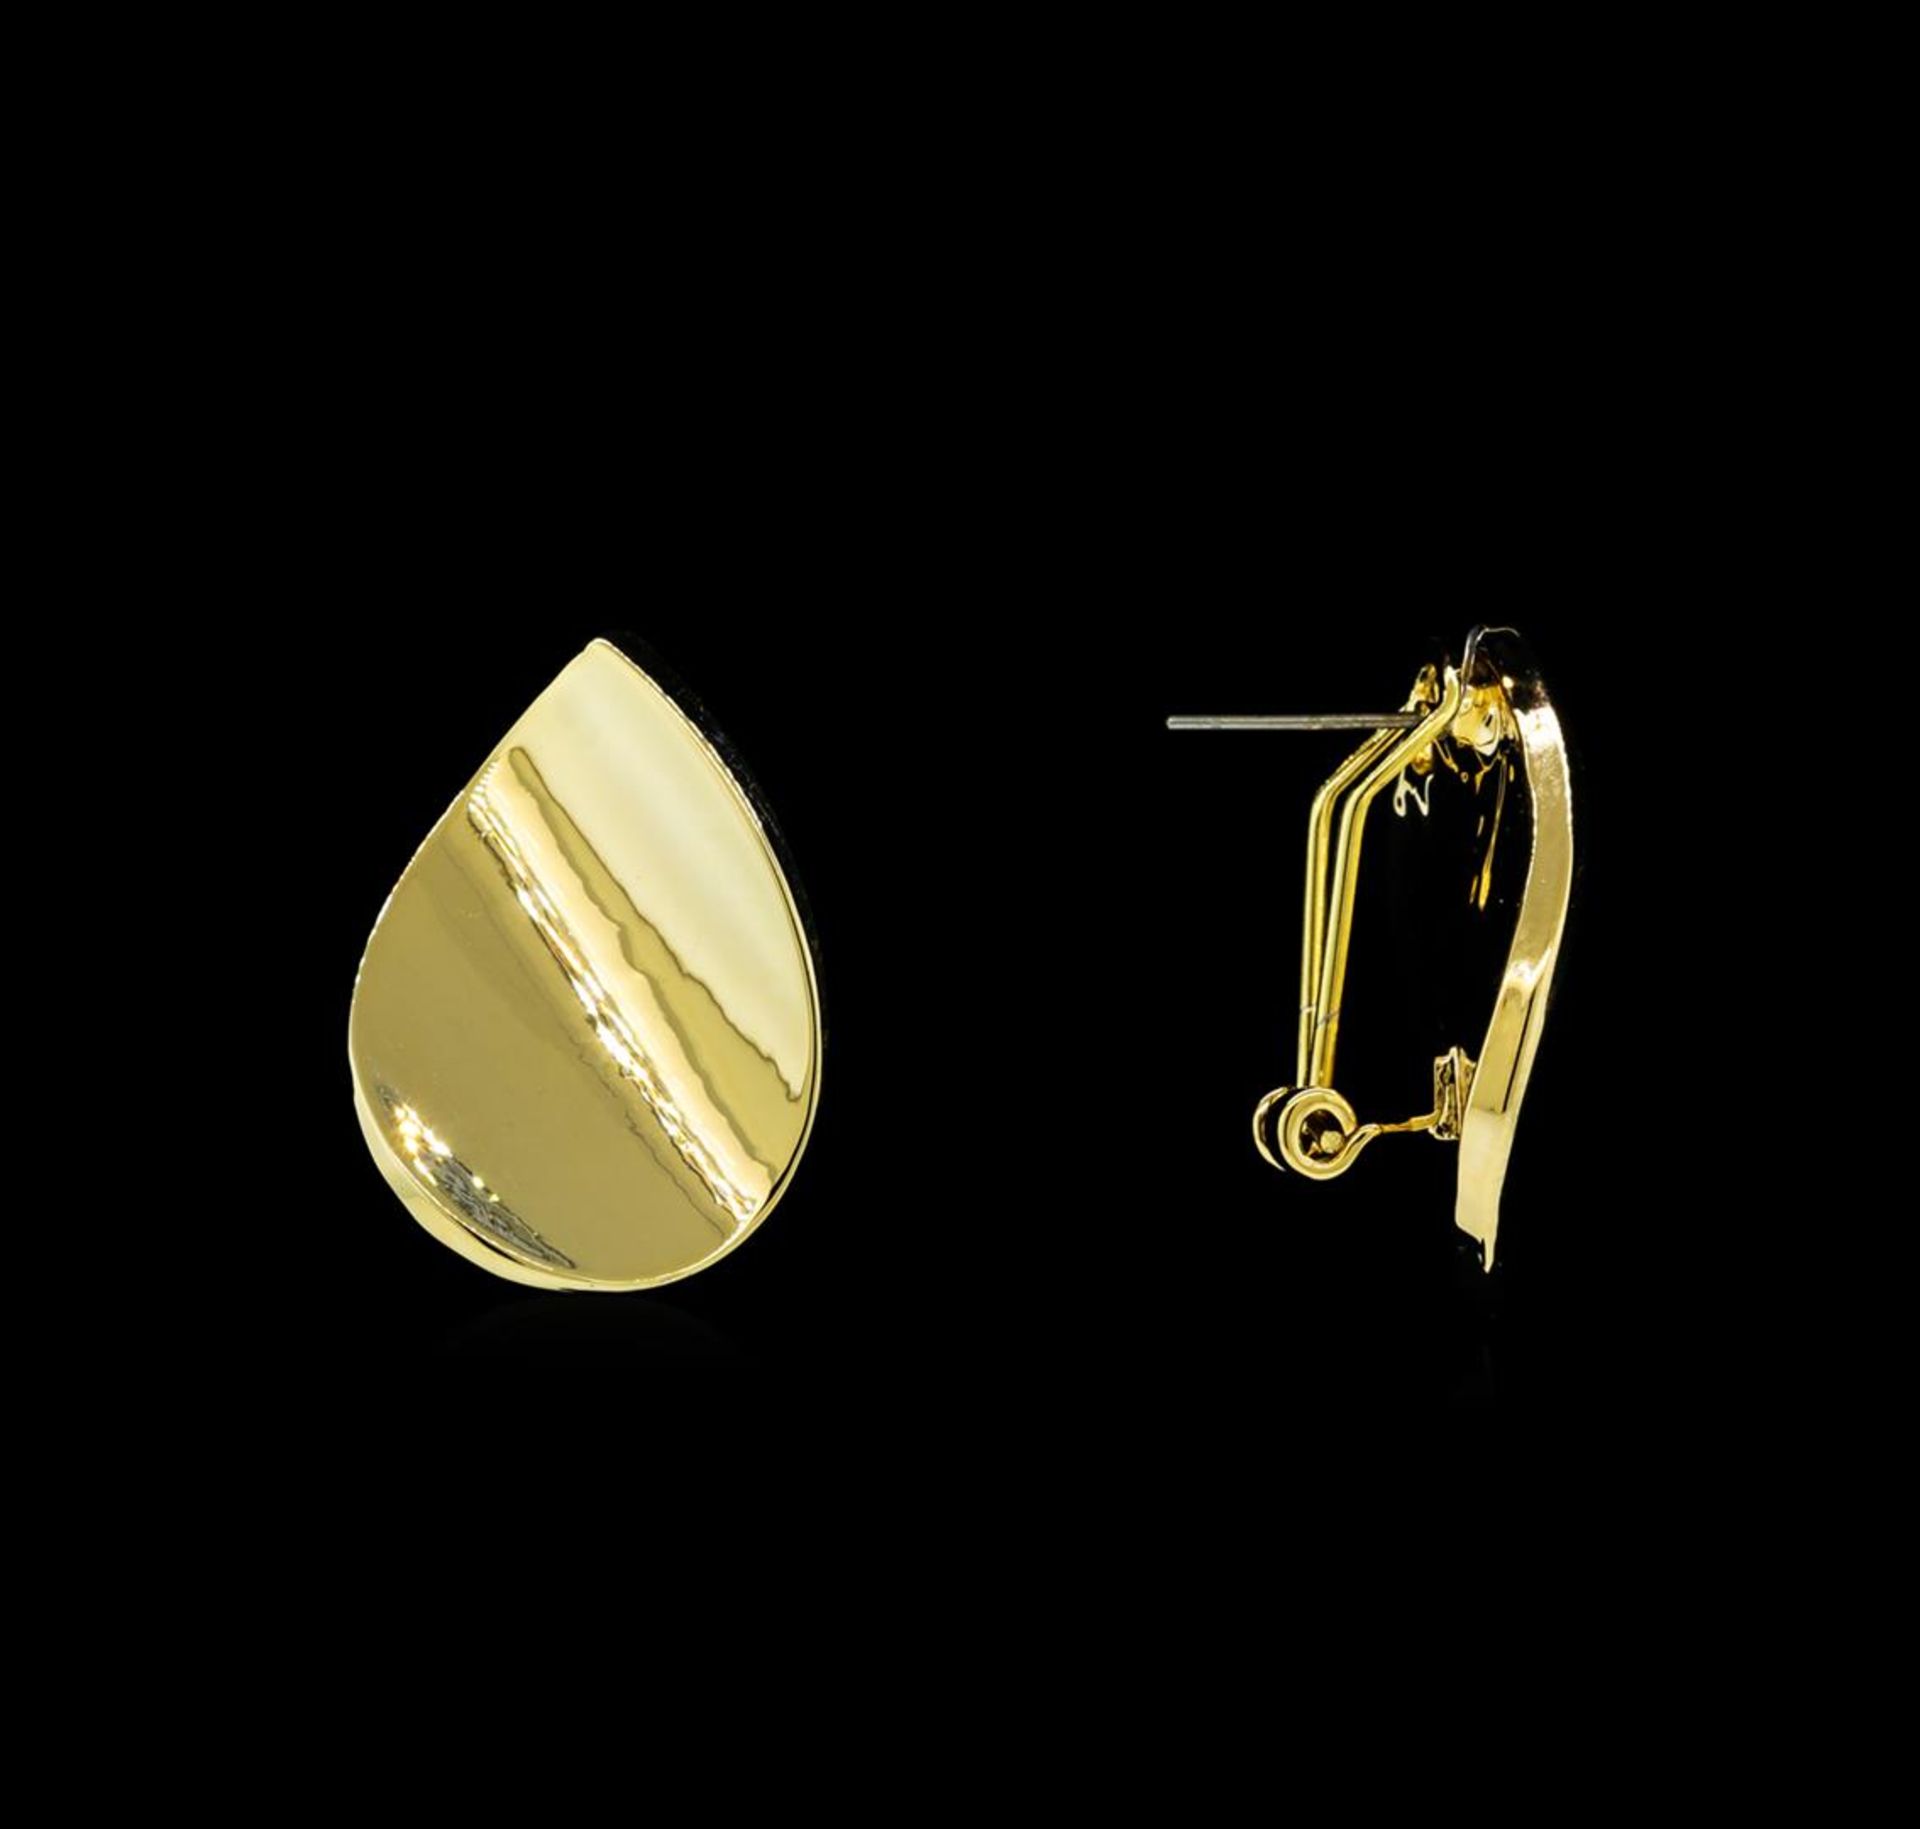 Concave Earrings - Gold Plated - Image 2 of 2